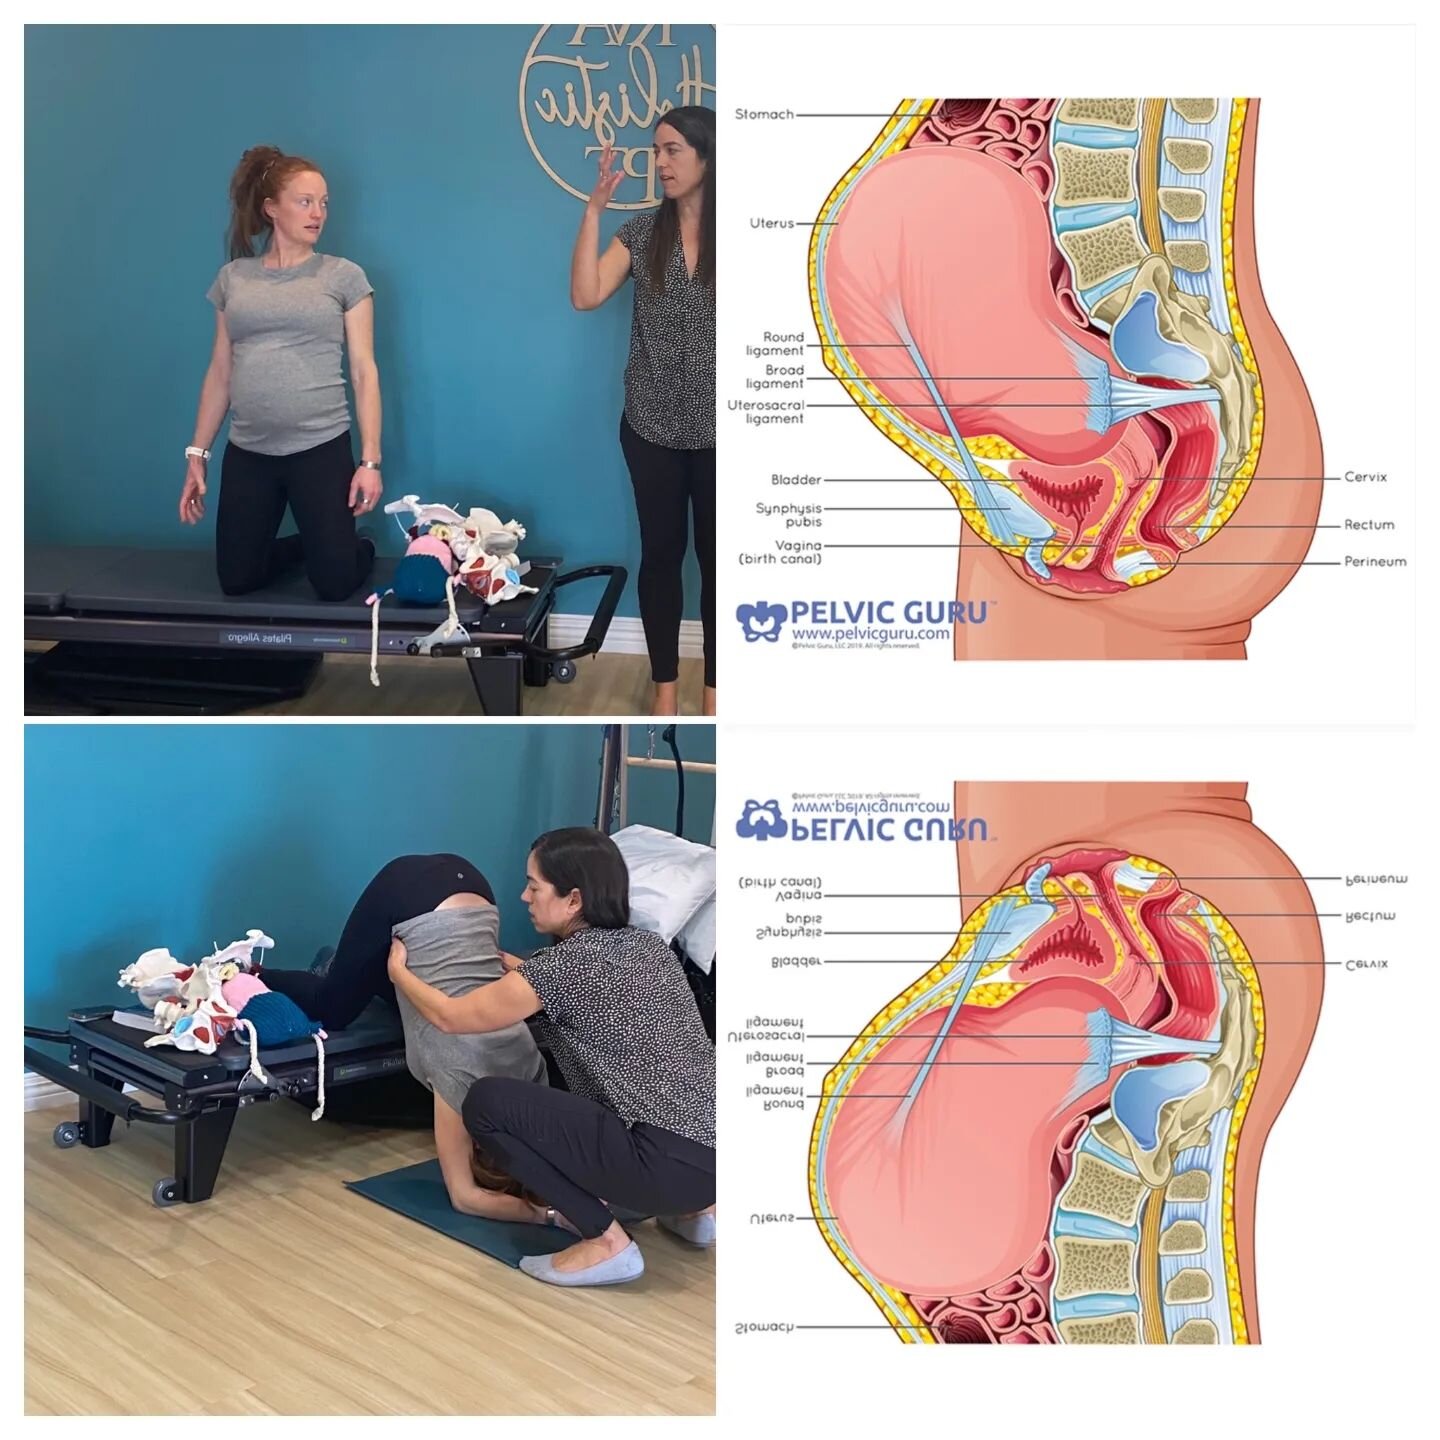 Did you know that you can use position, gravity and body work to optimize your baby&rsquo;s position?  Here at @rvaholisticpt we offer breech body balancing sessions starting at 28 weeks and in our sessions show you positions and use of gravity as we